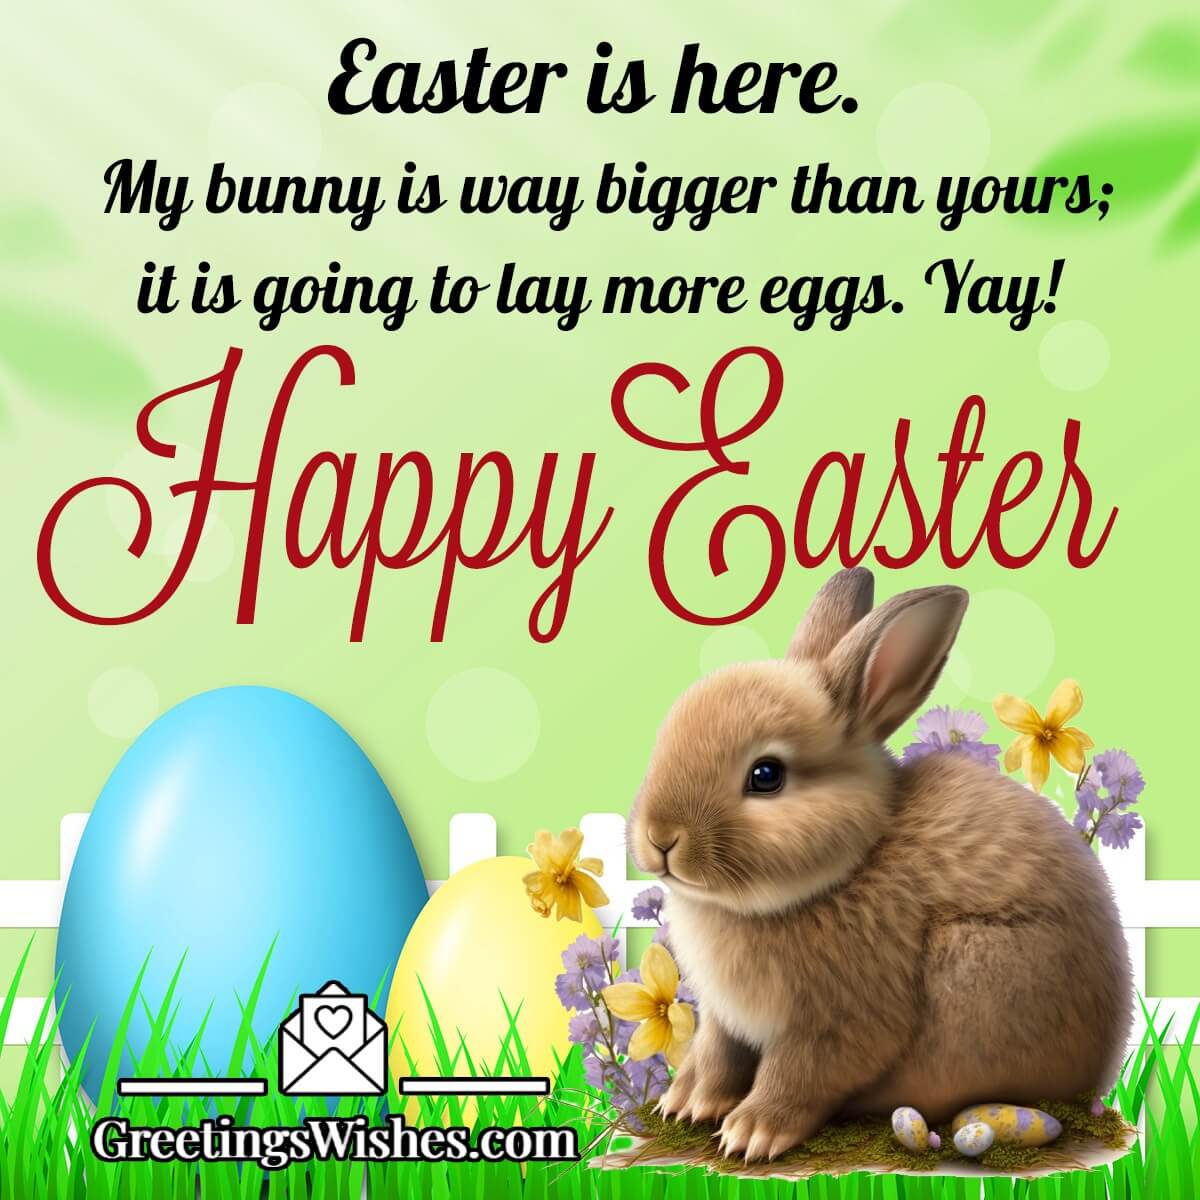 Easter Wishes For Kids